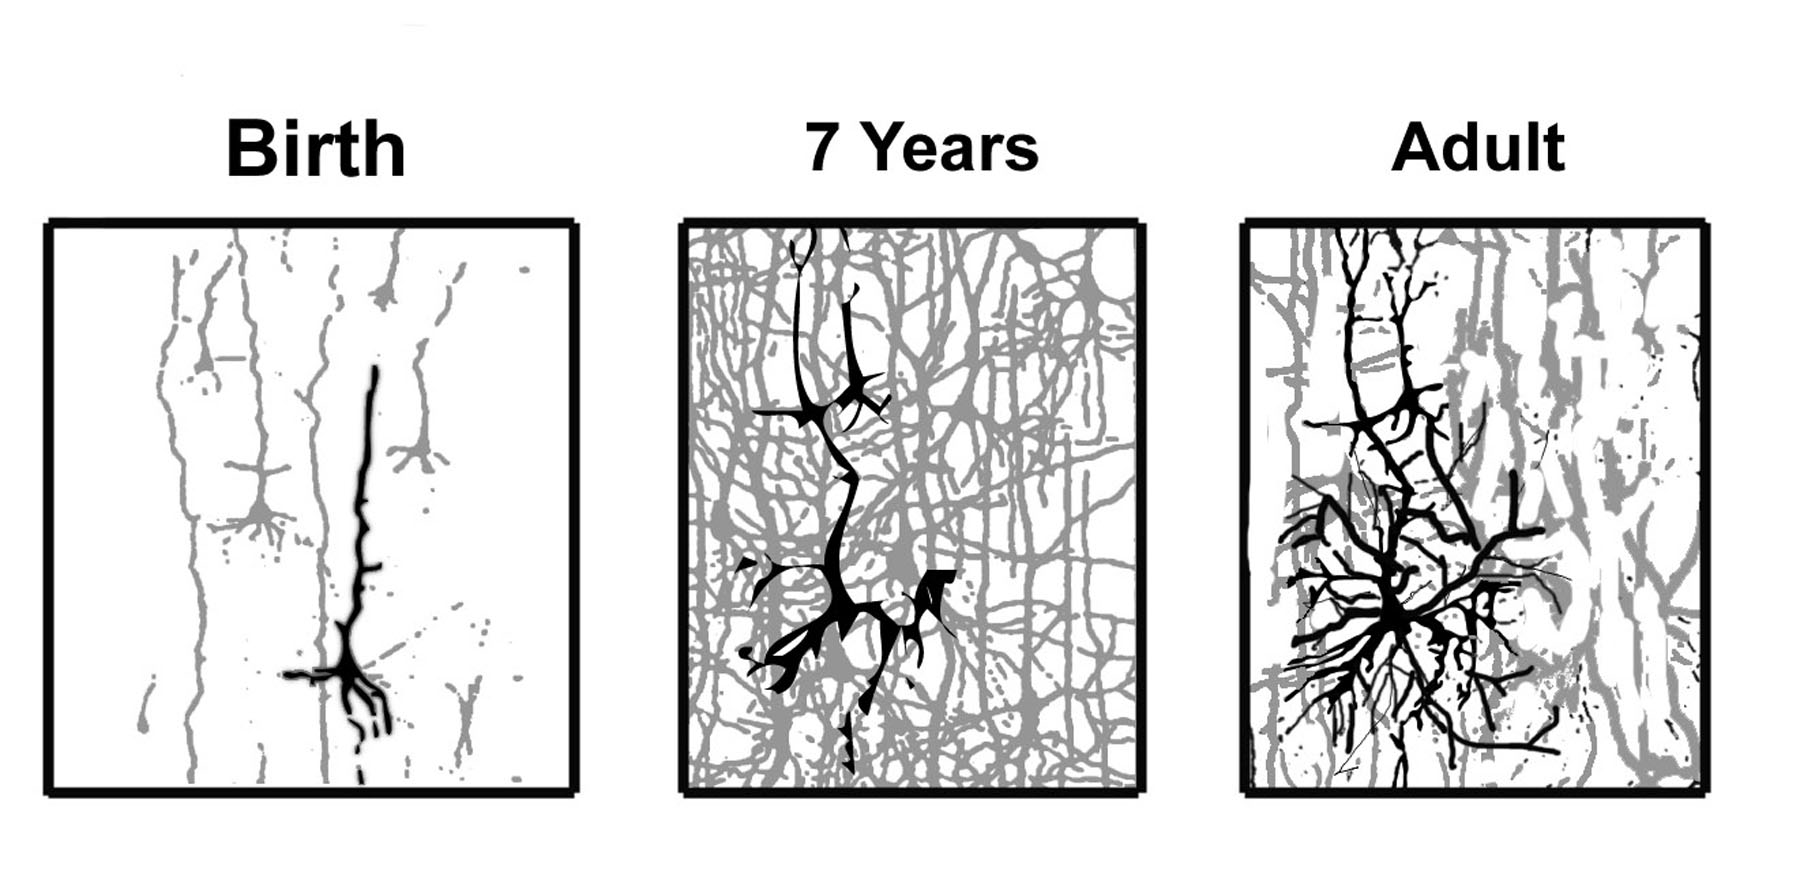 Nerve cells shown thinning out but getting more complex with age